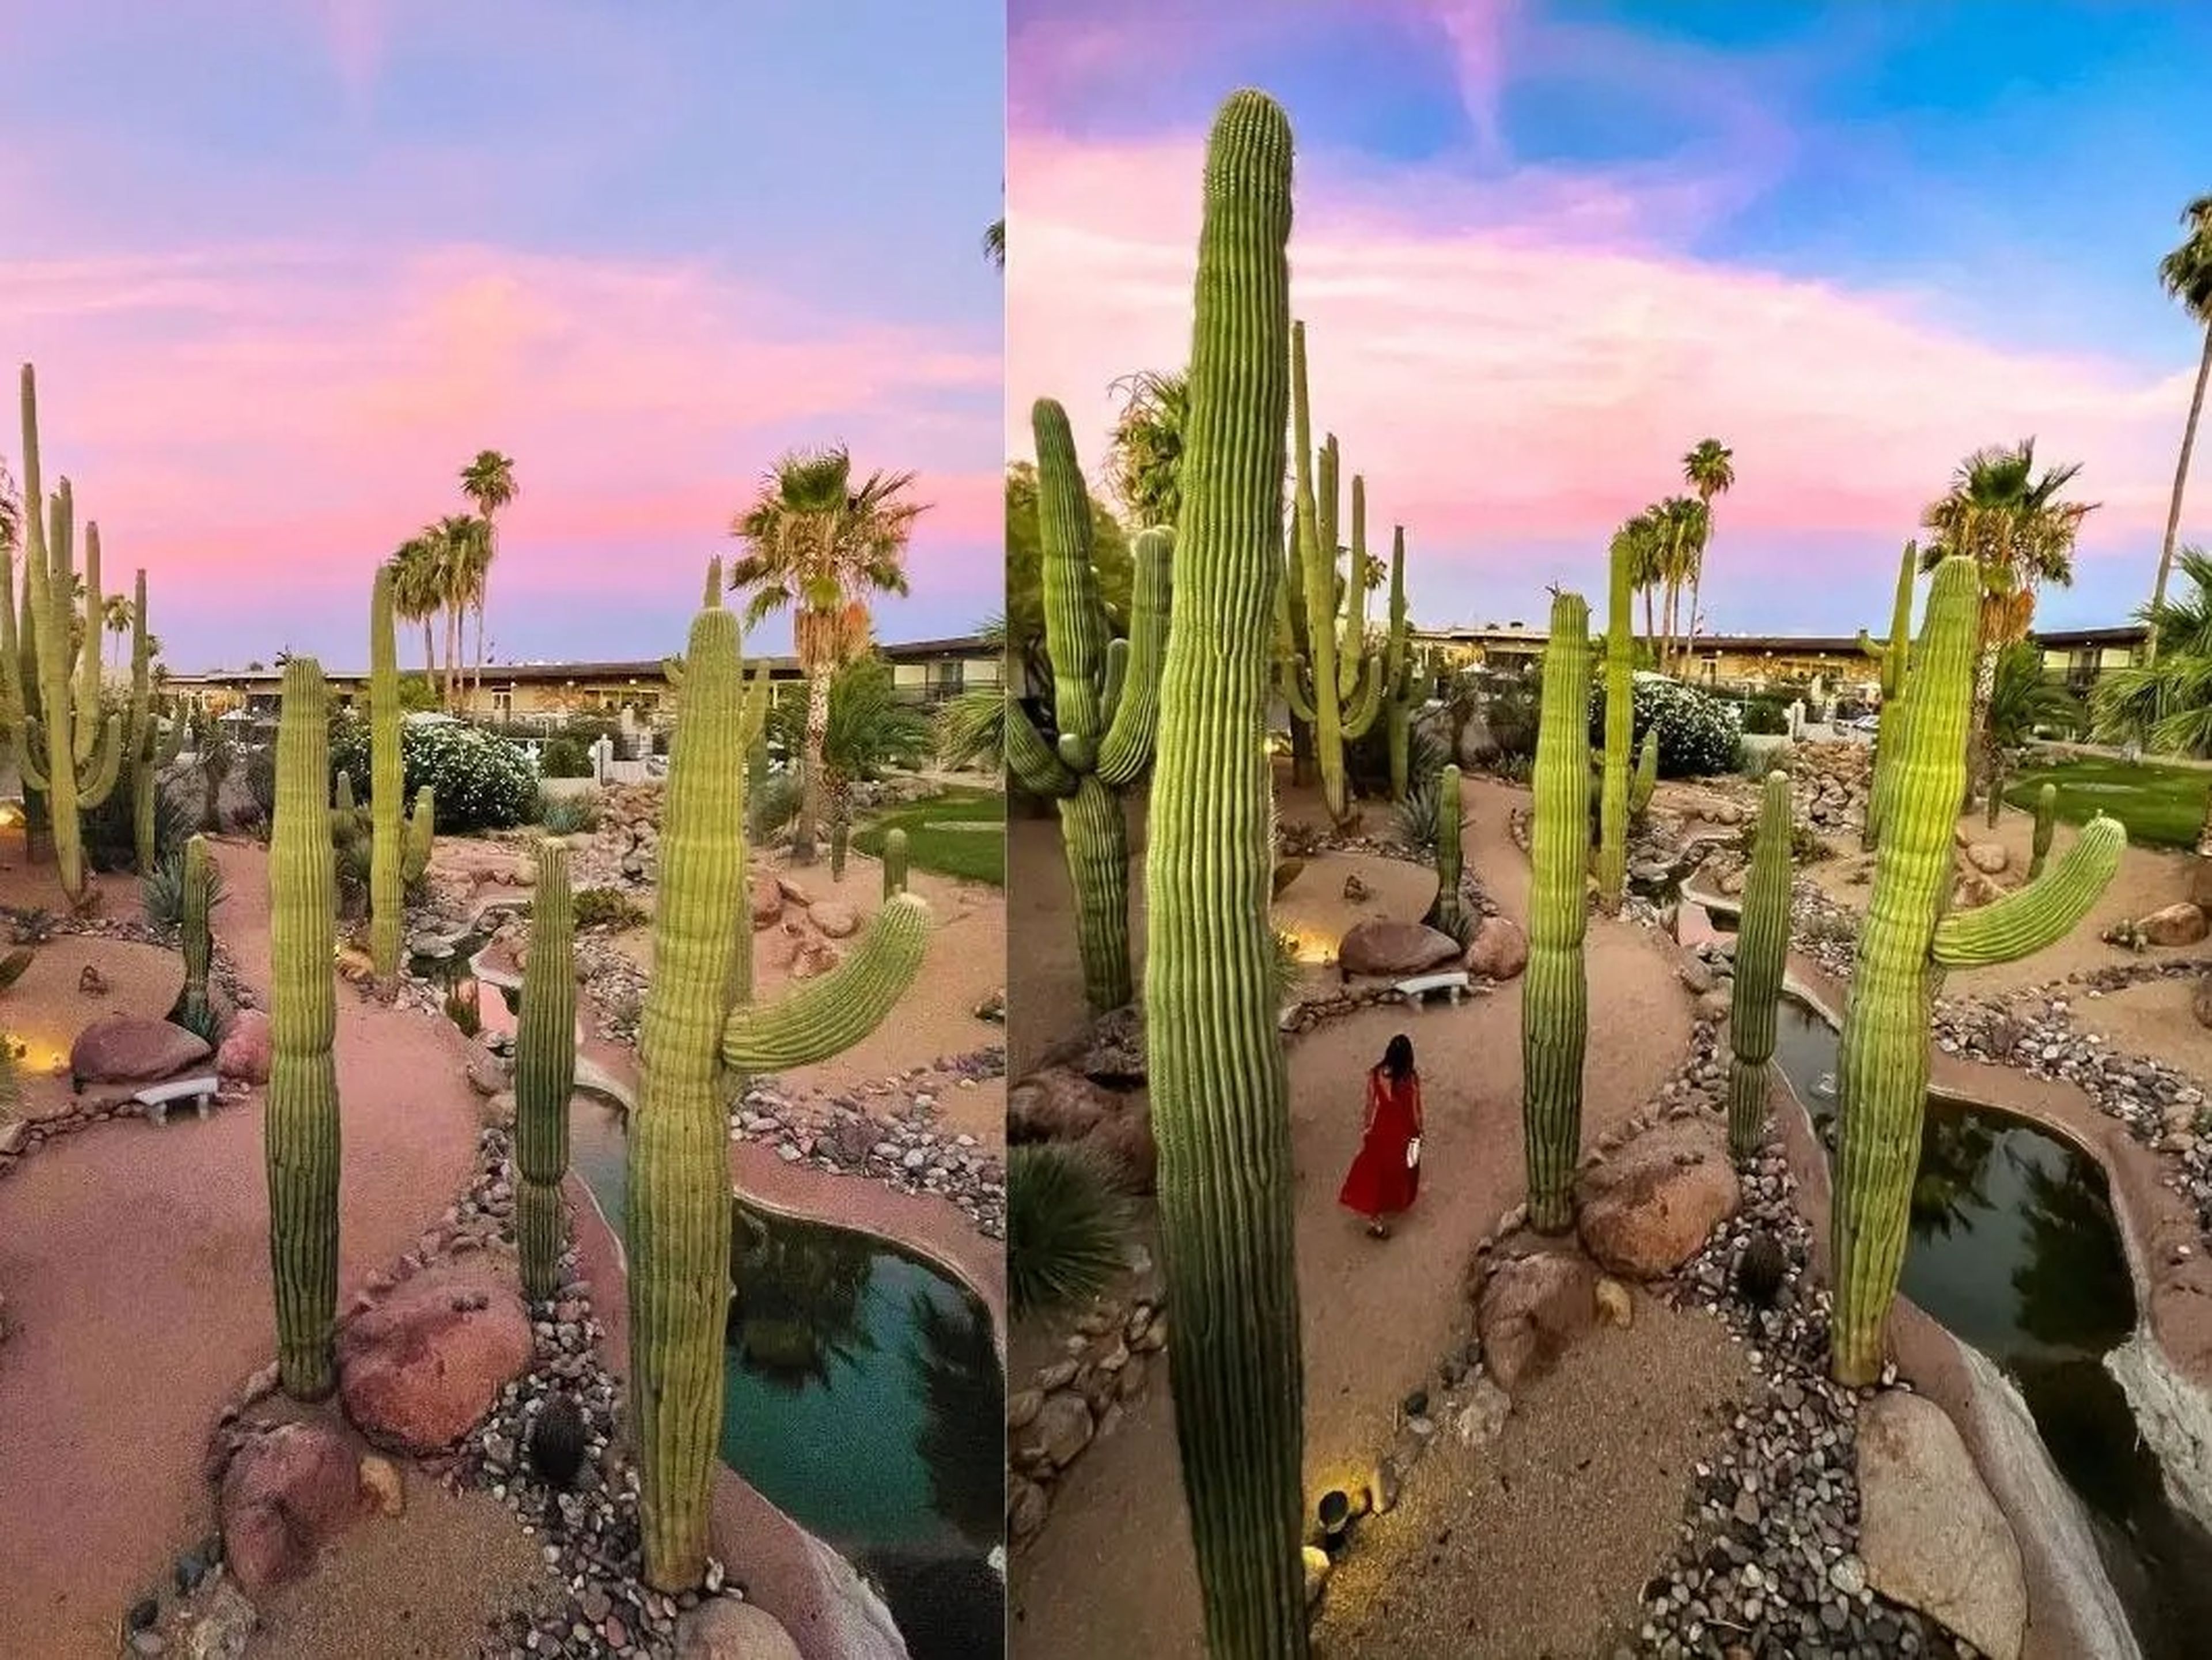 On the left, tall cacti under pink skies. On the right, Emily walking among the tall cacti under pink skies.